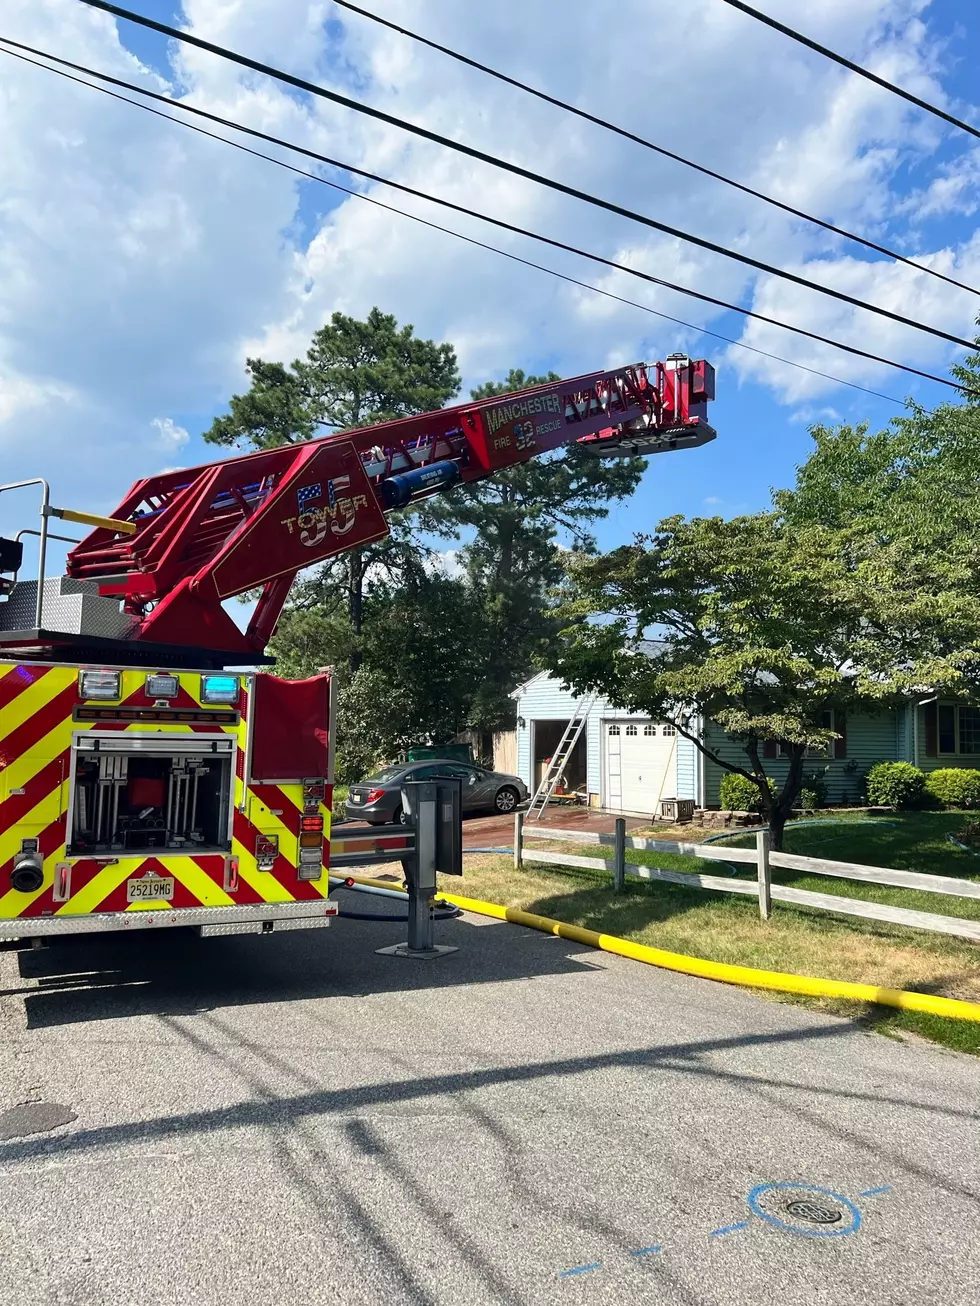 Unoccupied Friday home fire remains under investigation in Manchester, NJ